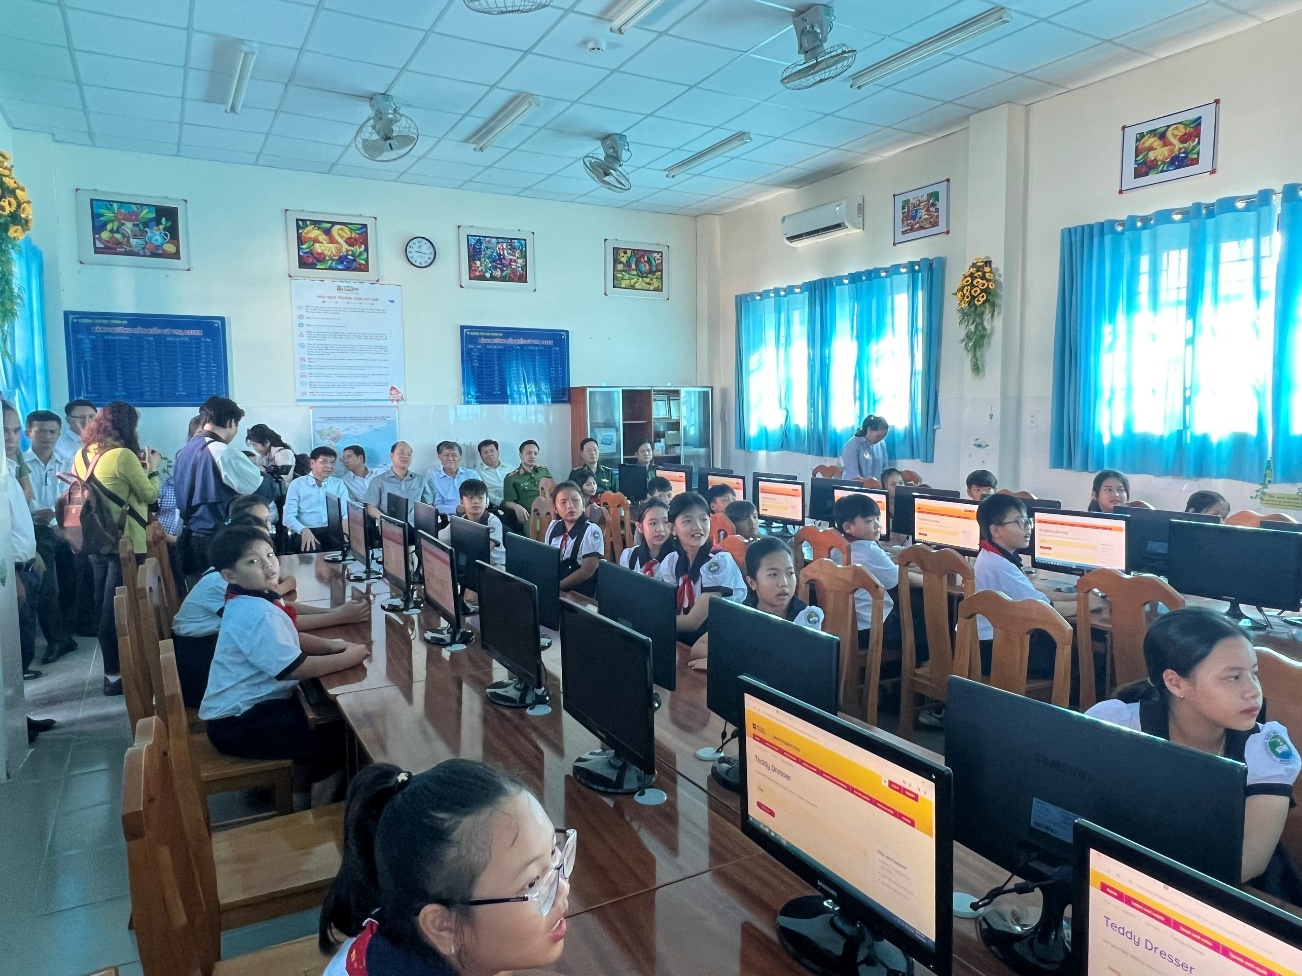 Students of Thanh An Elementary School attended Fine Arts digital classroom